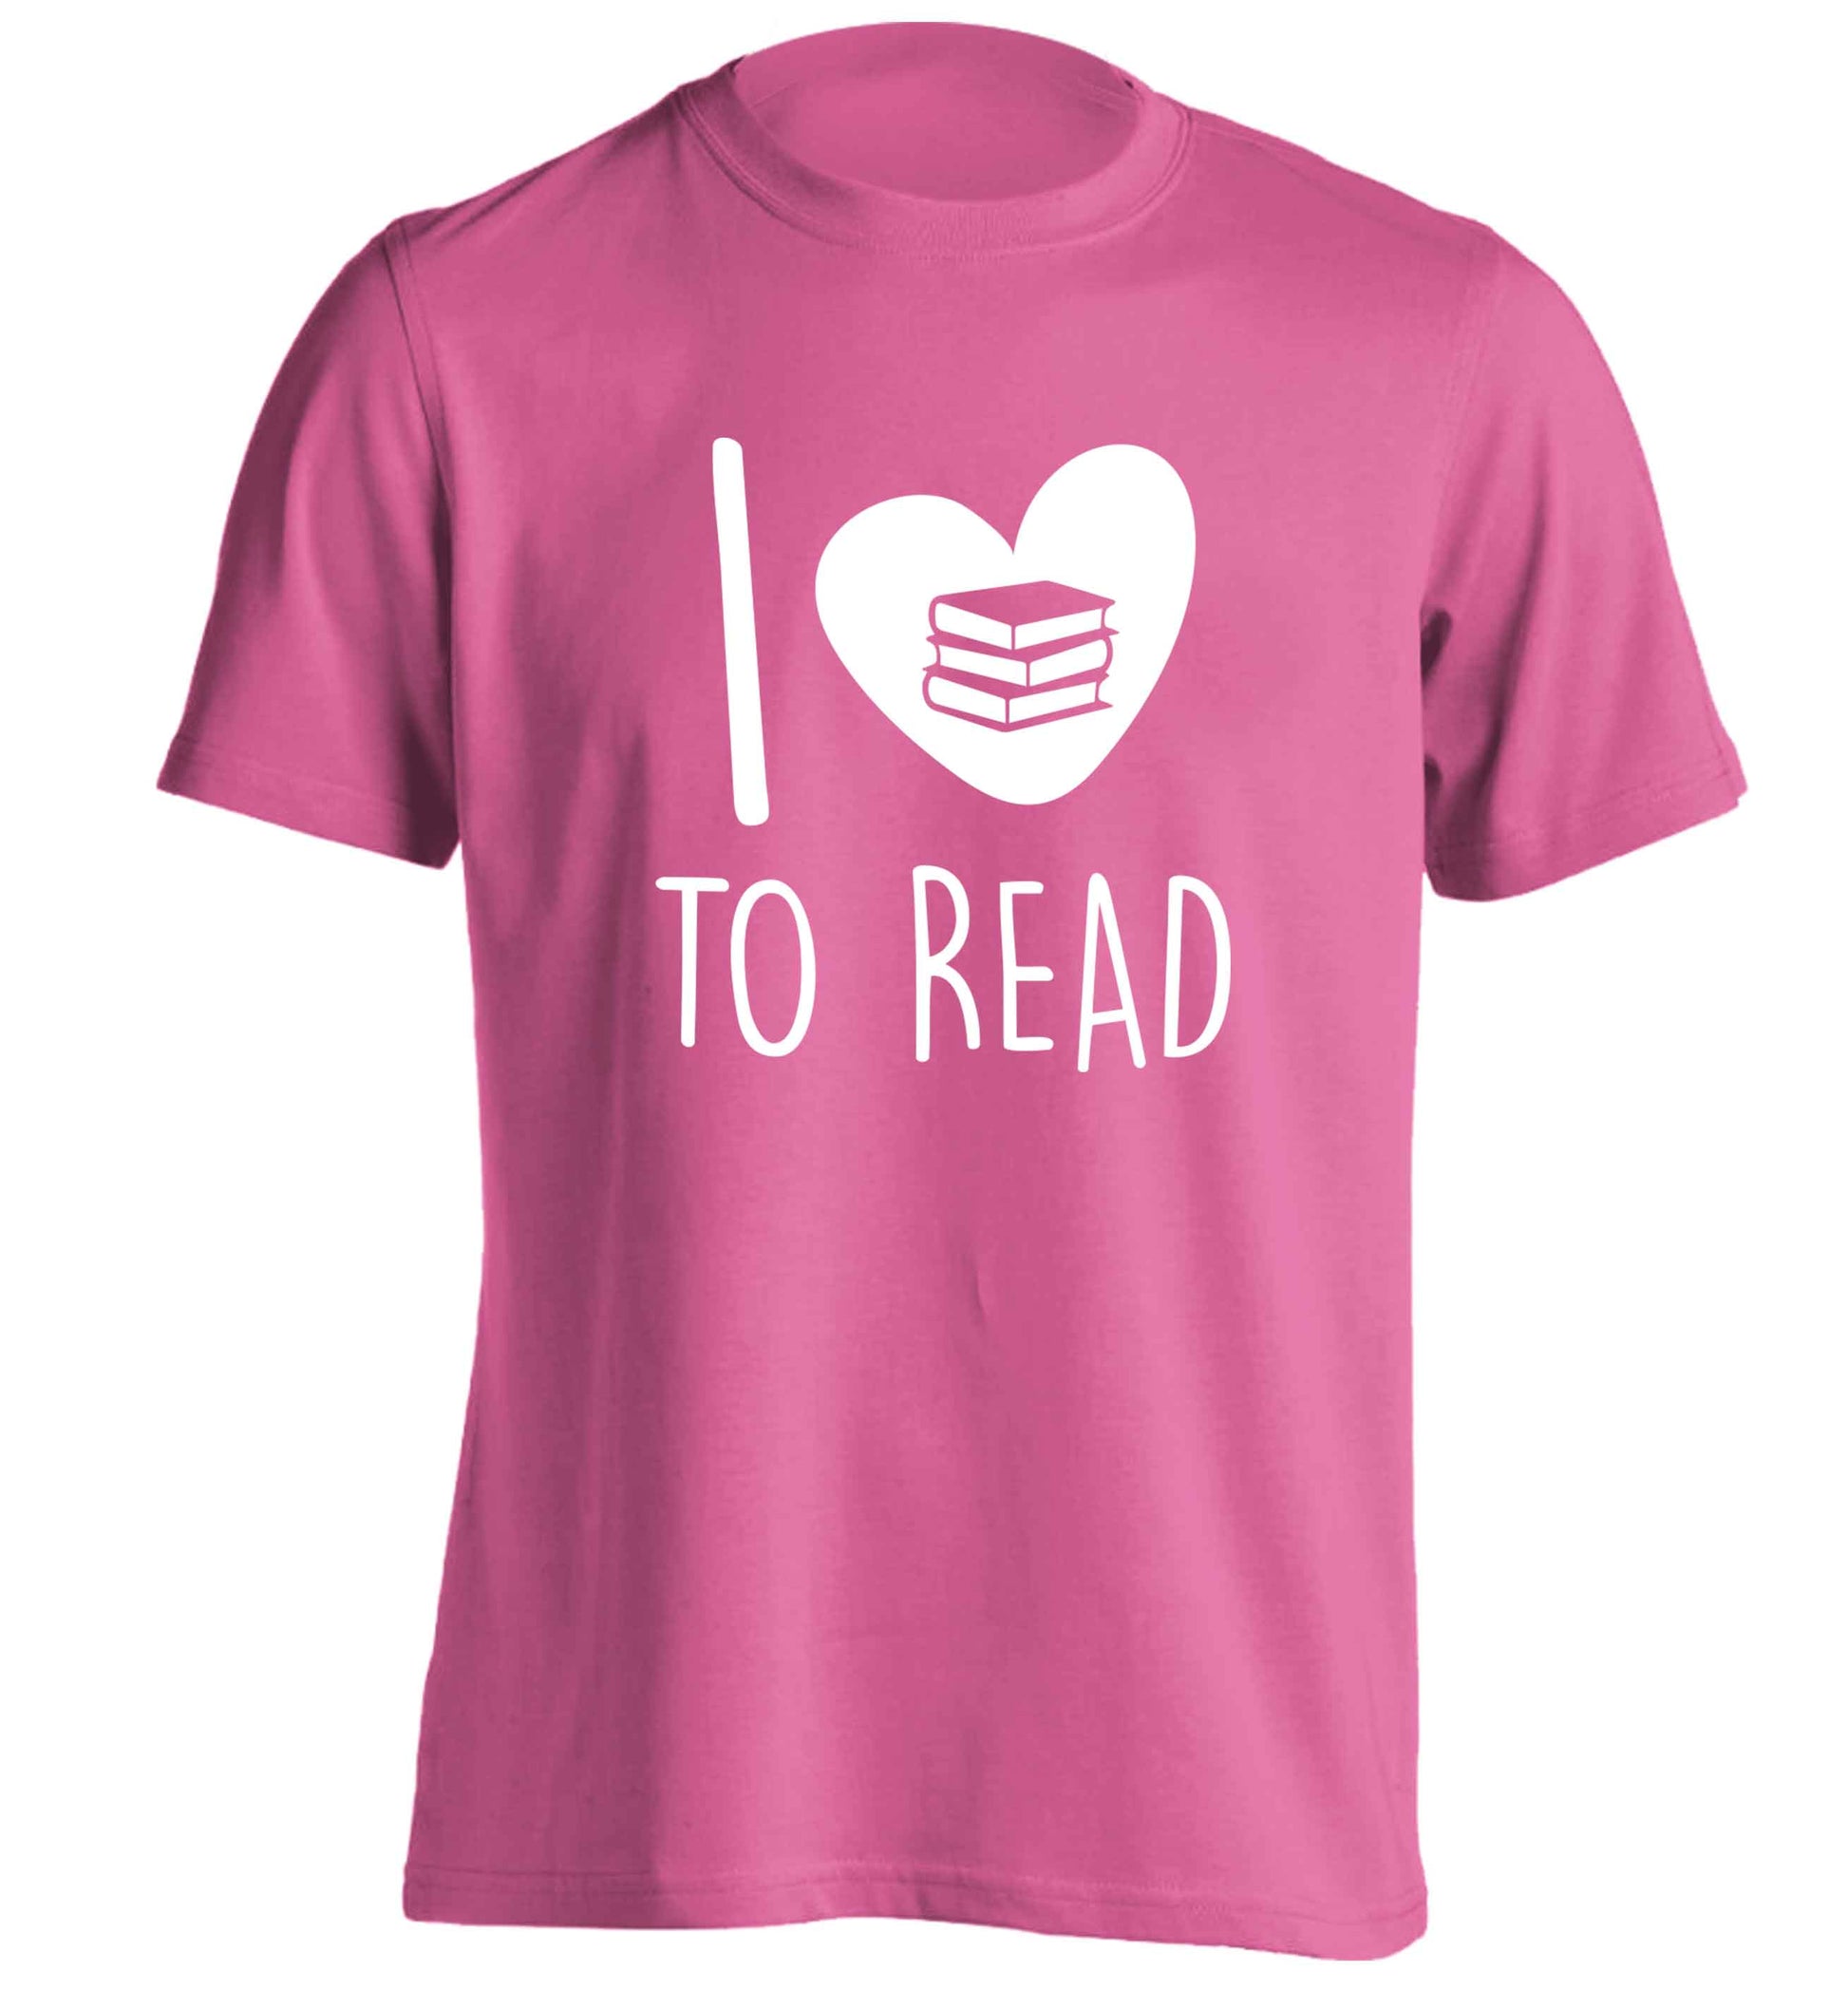 I love to read adults unisex pink Tshirt 2XL